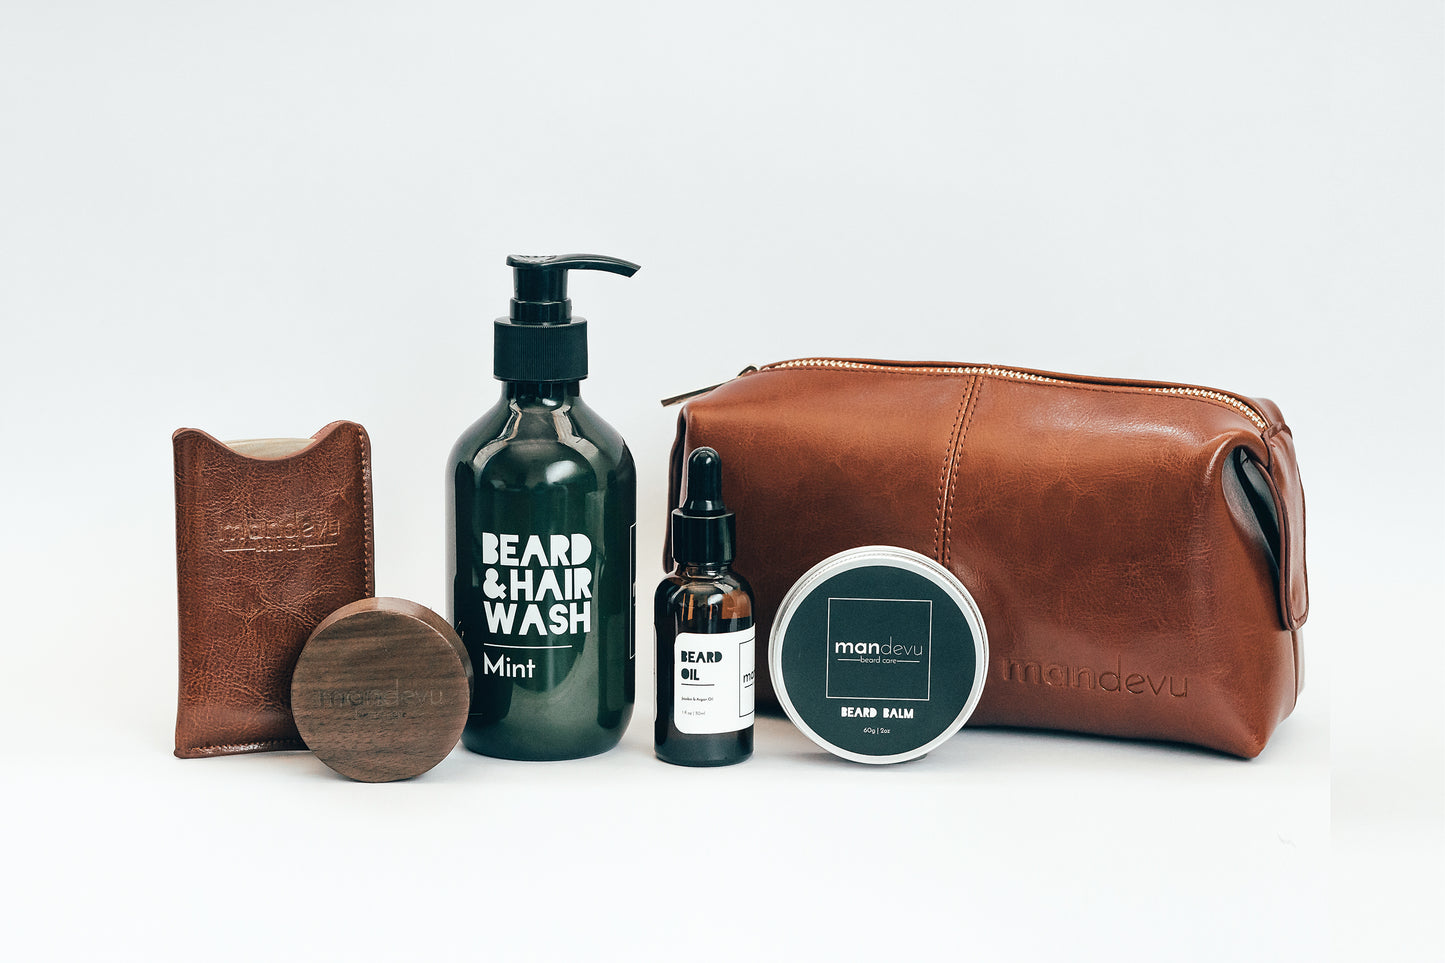 THE BEARD CARE SET WITH LEATHER BAG